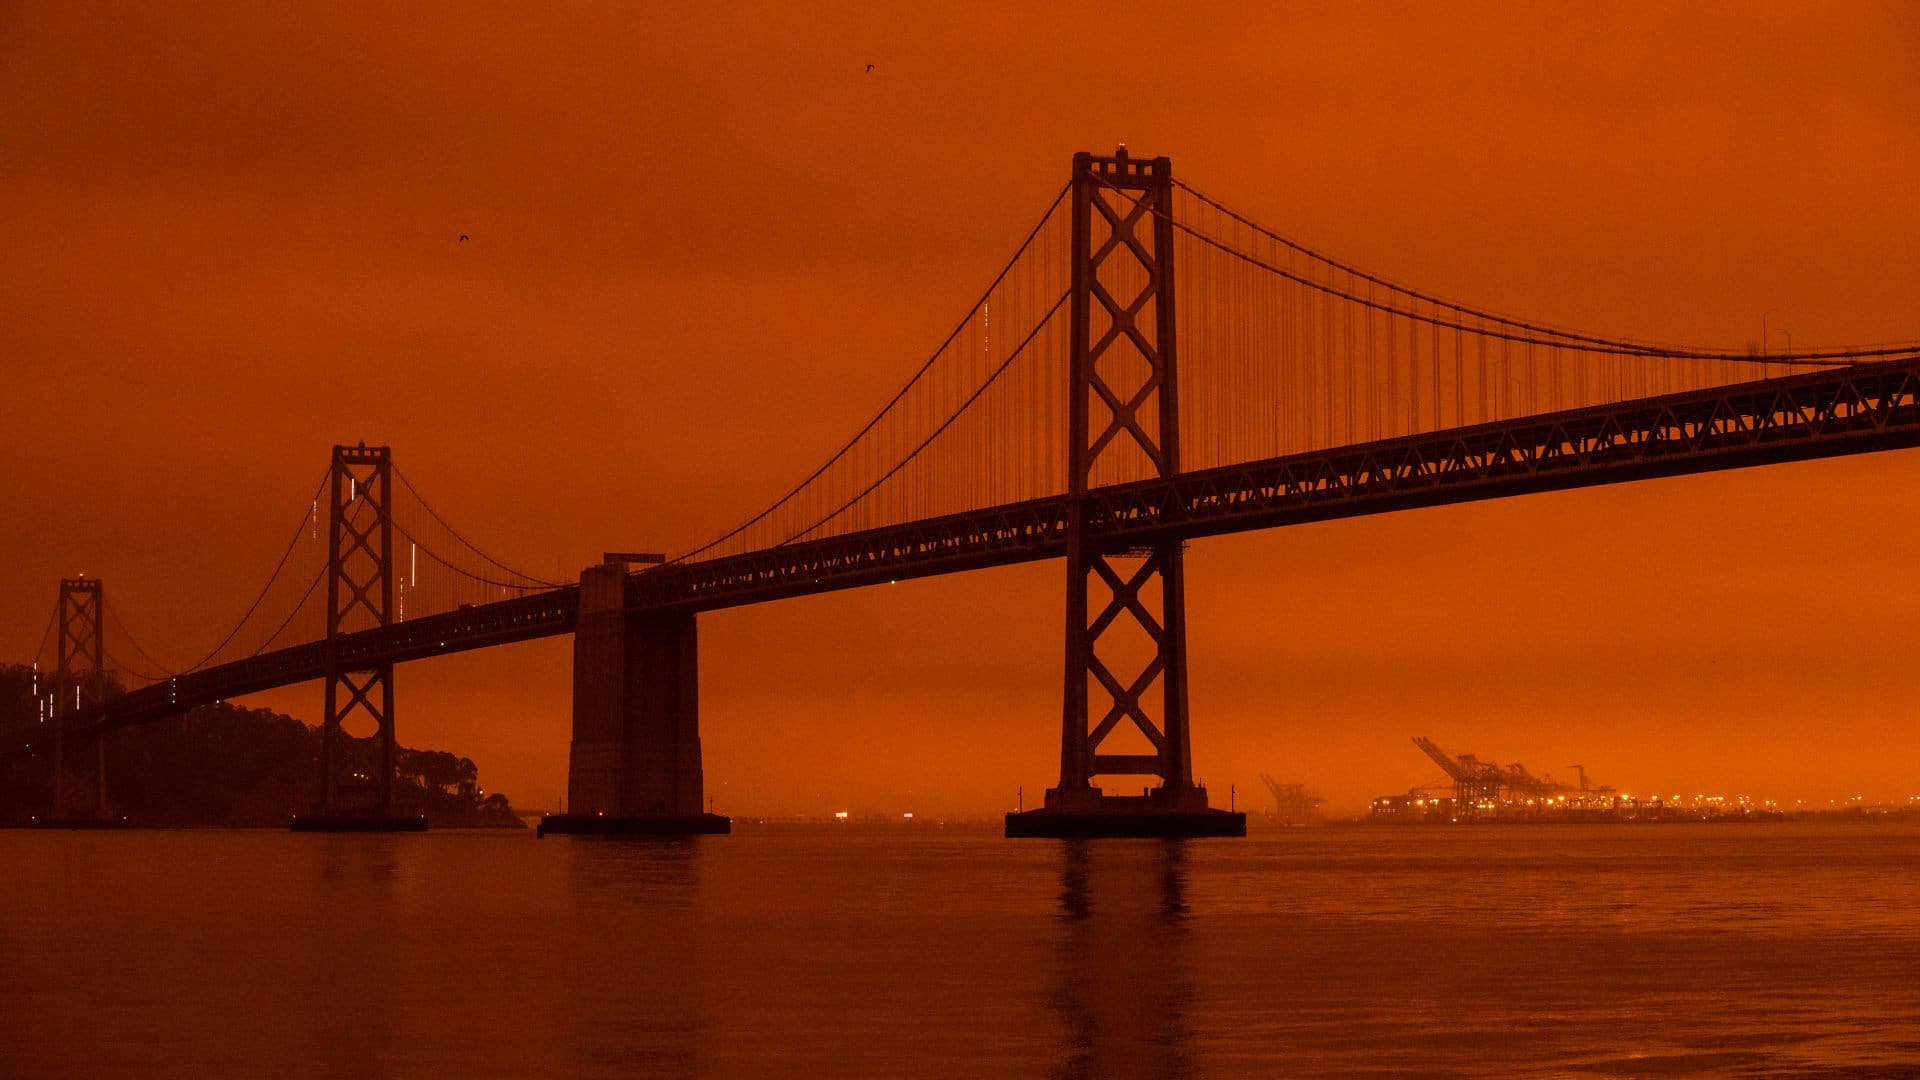 Smoke from wildfires burning across Northern California blankets San Francisco in a dark, orange glow on September 9, 2020.